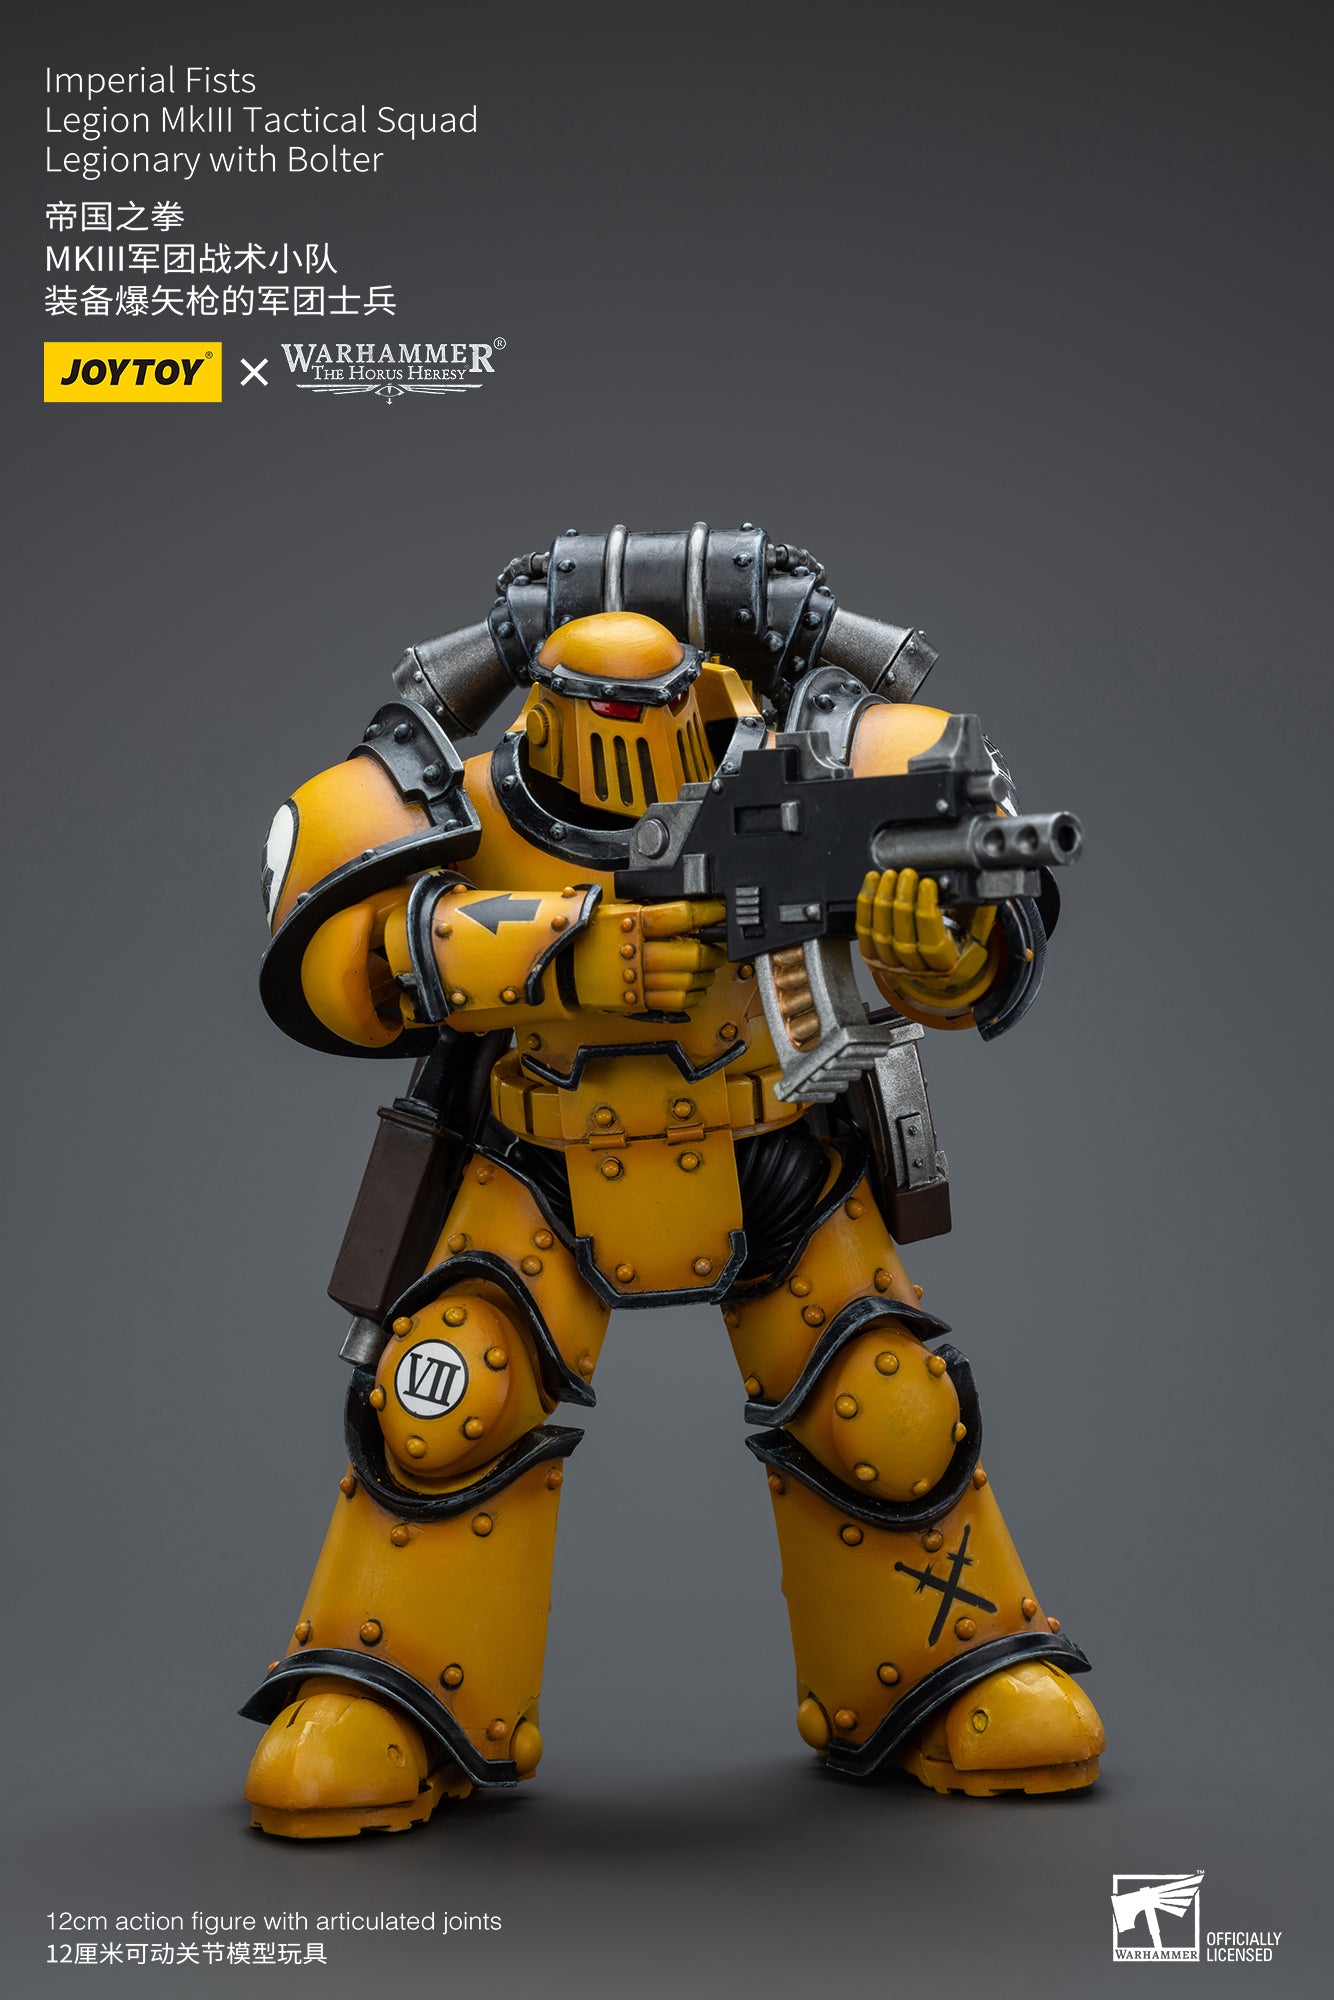 Warhammer: The Horus Hersey: Imperial Fists: Legionary with Bolter: Joy Toy